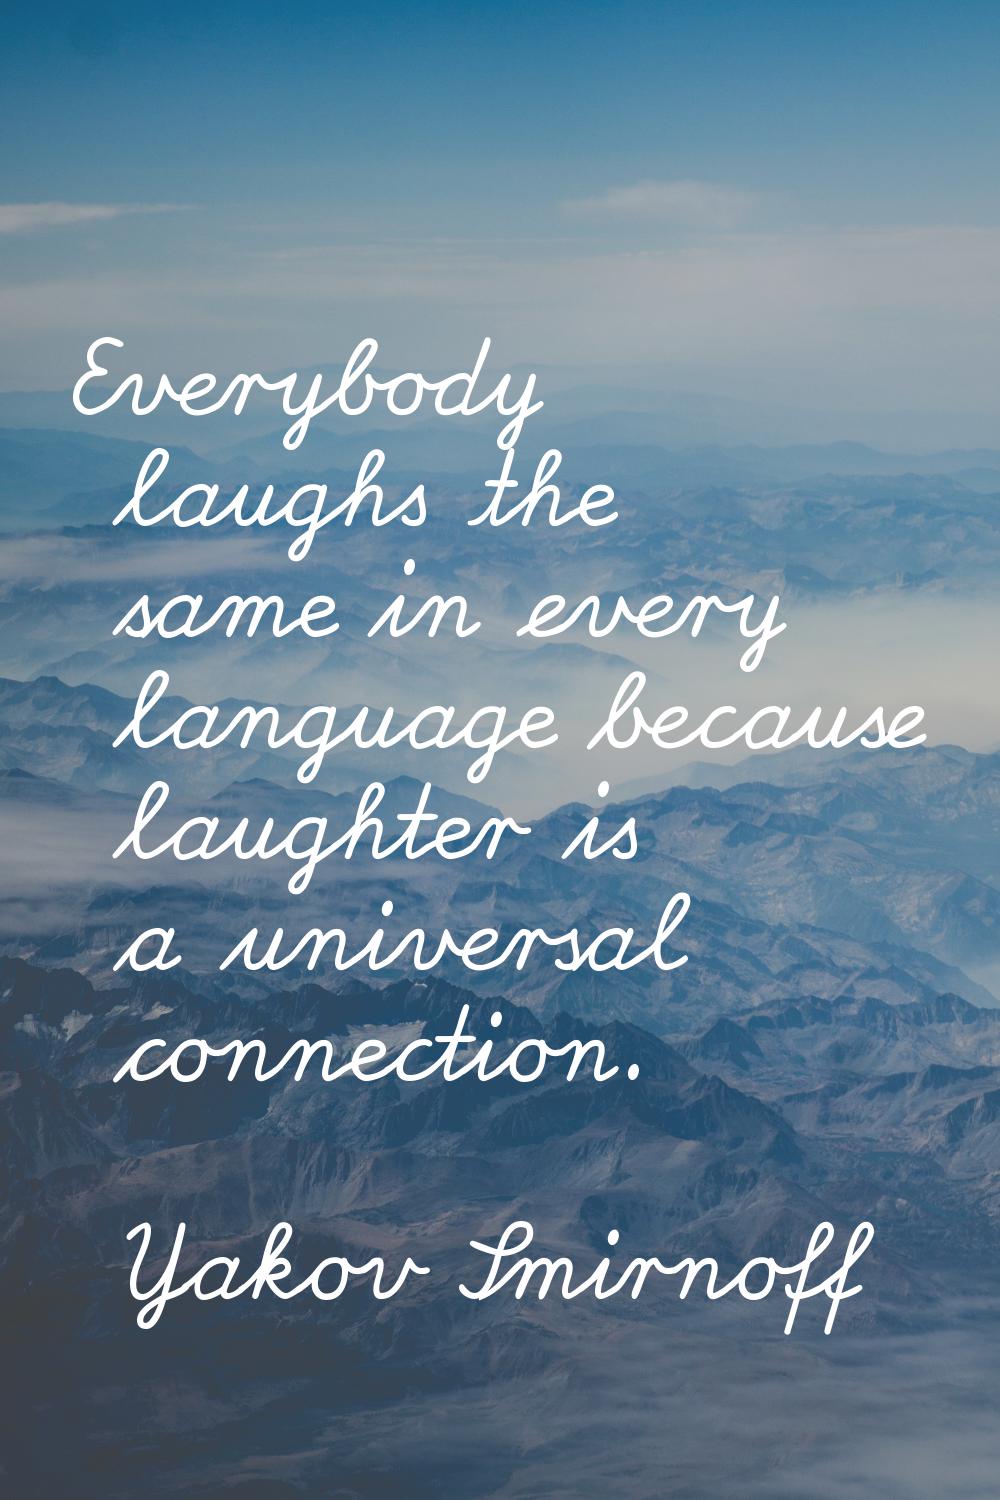 Everybody laughs the same in every language because laughter is a universal connection.